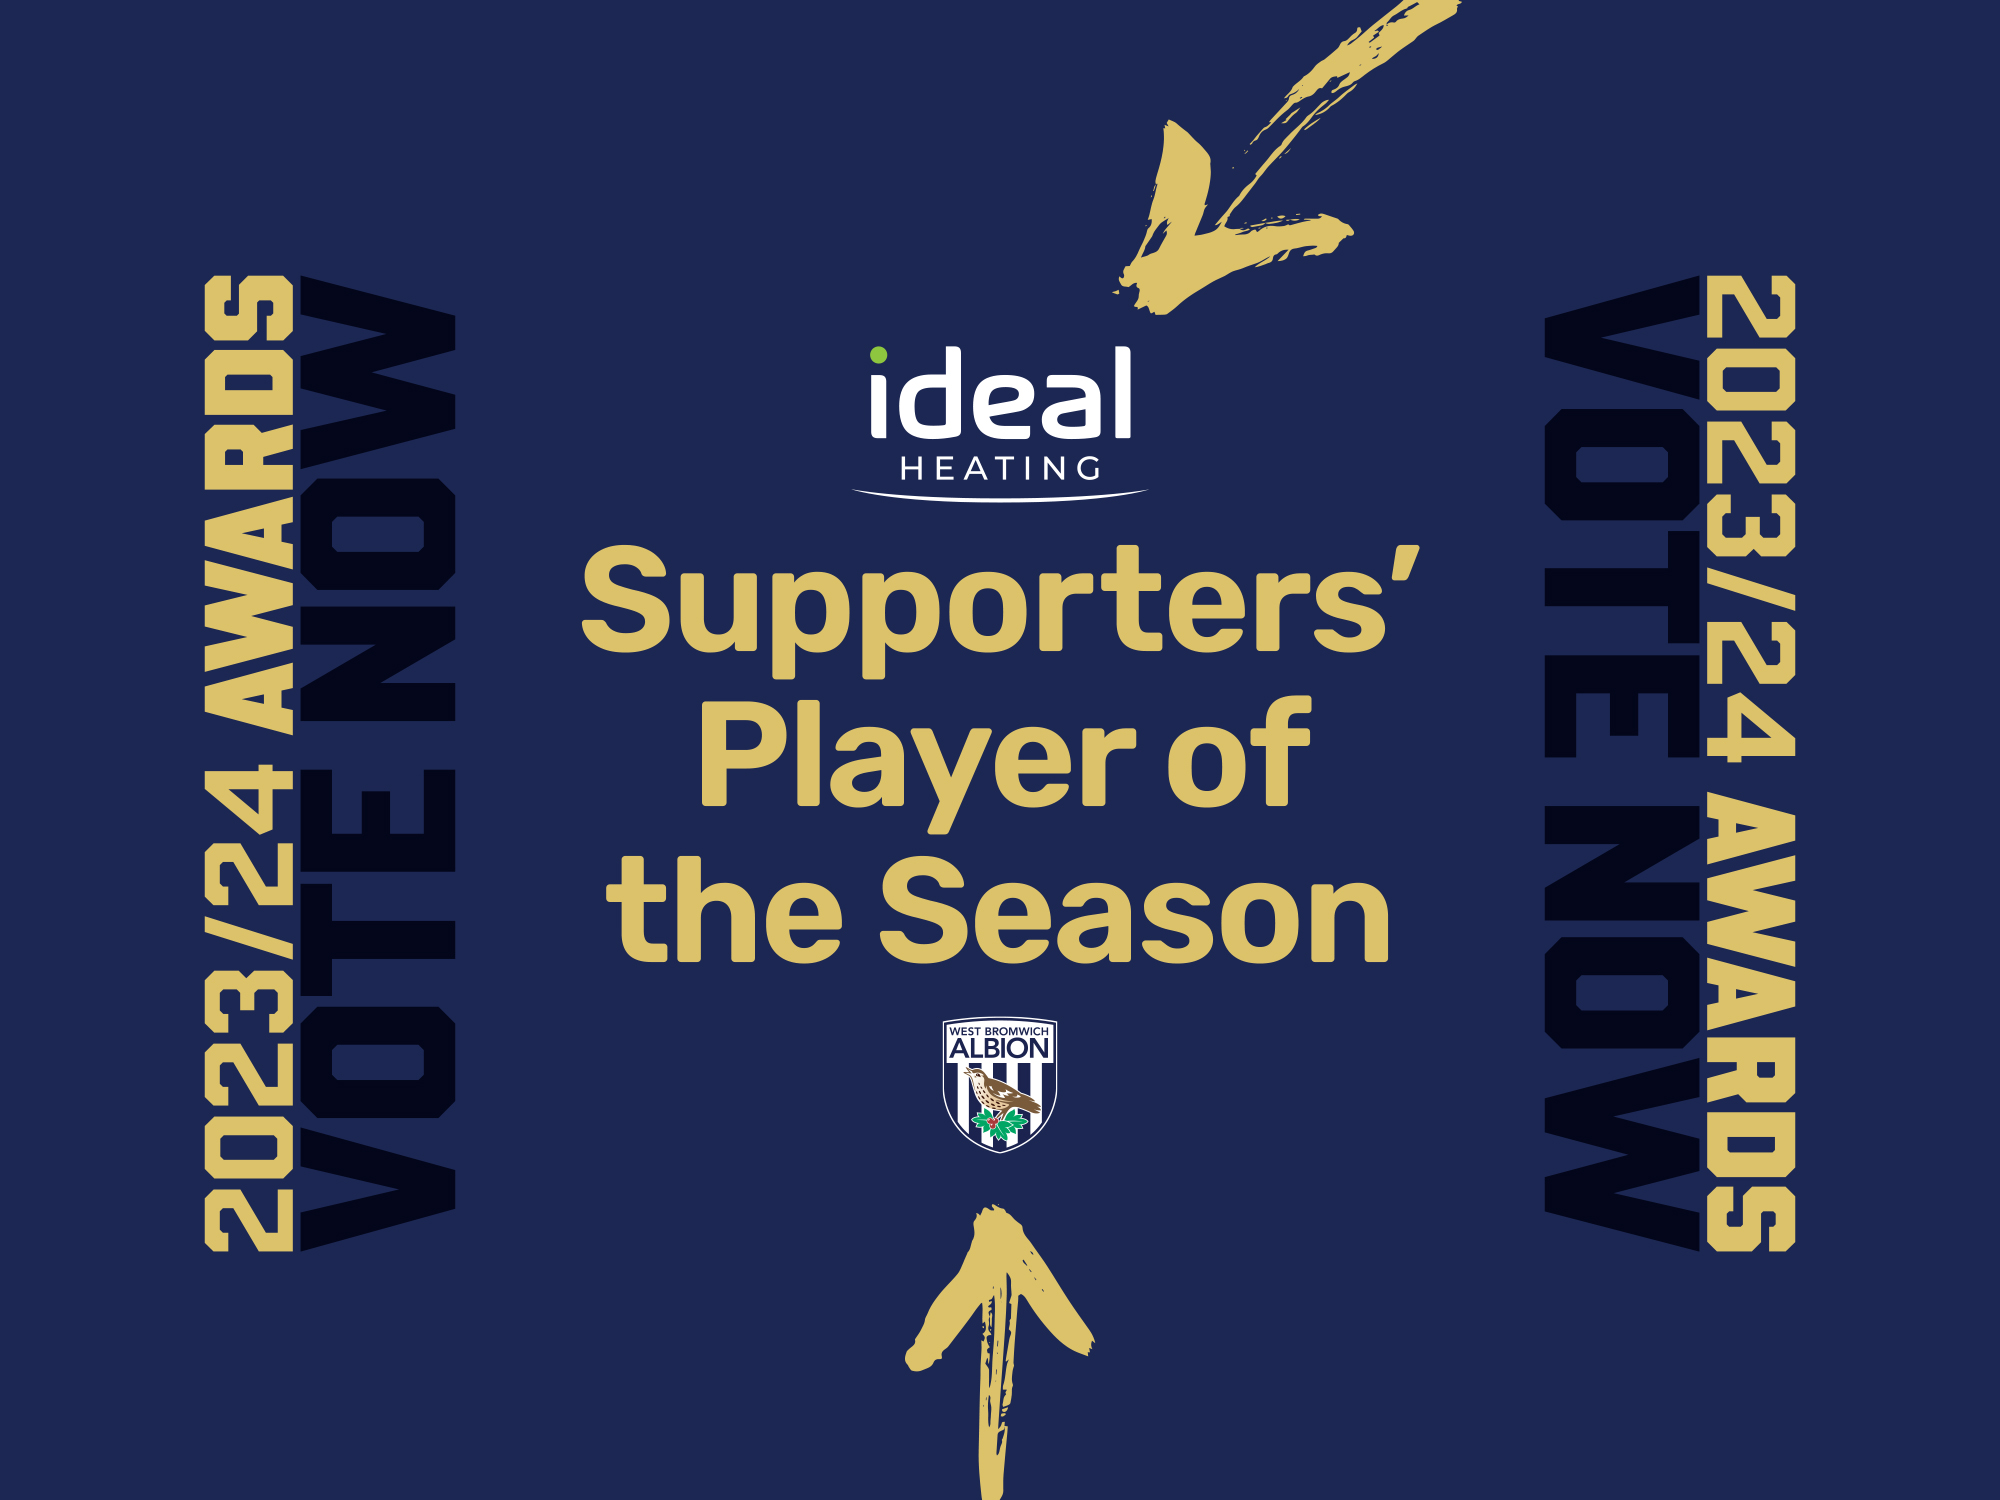 The Ideal Heating Supporters' Player of the Season vote now graphic